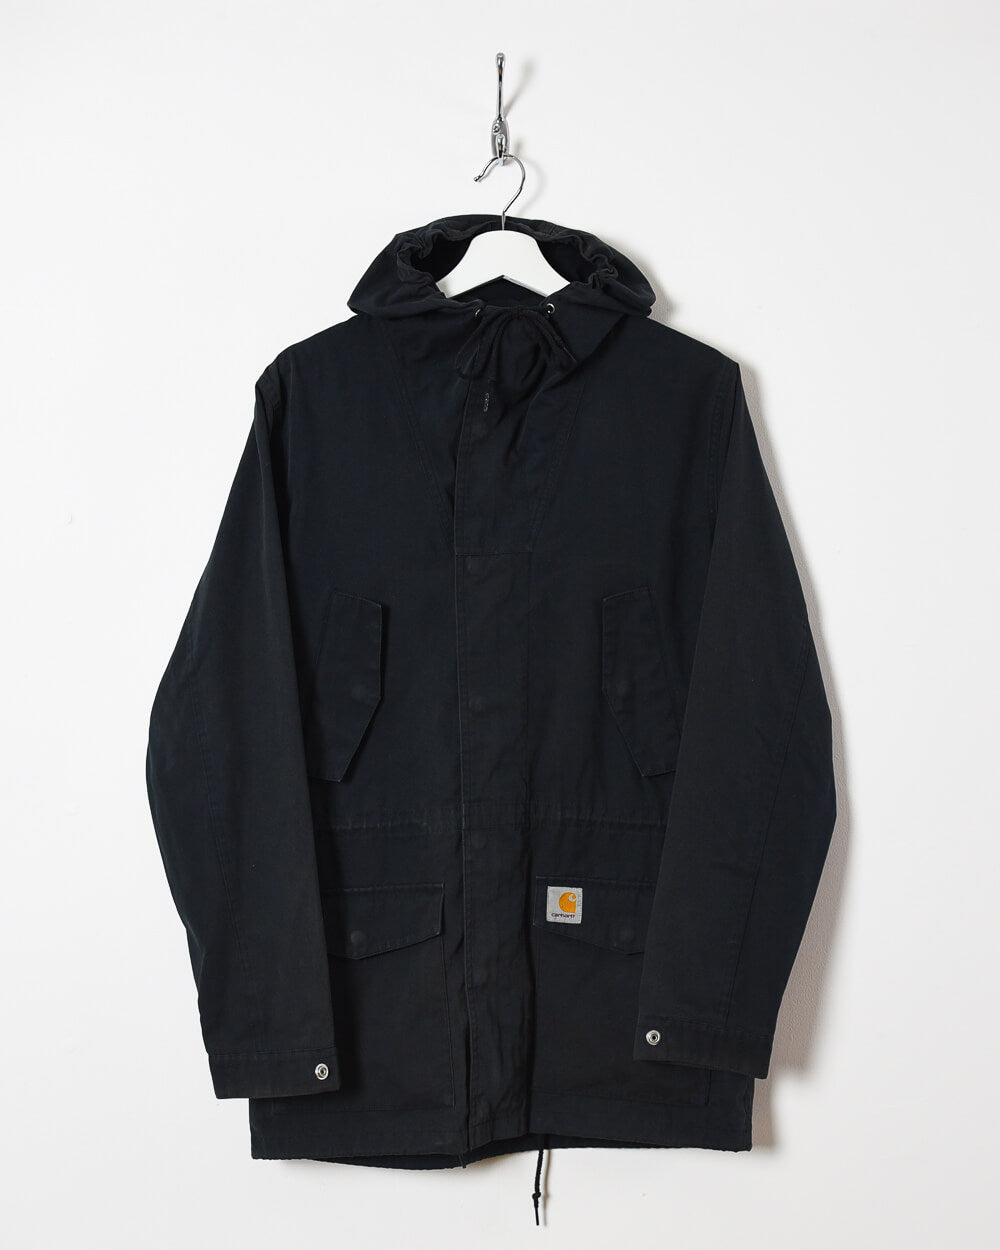 Carhartt Hooded Jacket - Small - Domno Vintage 90s, 80s, 00s Retro and Vintage Clothing 